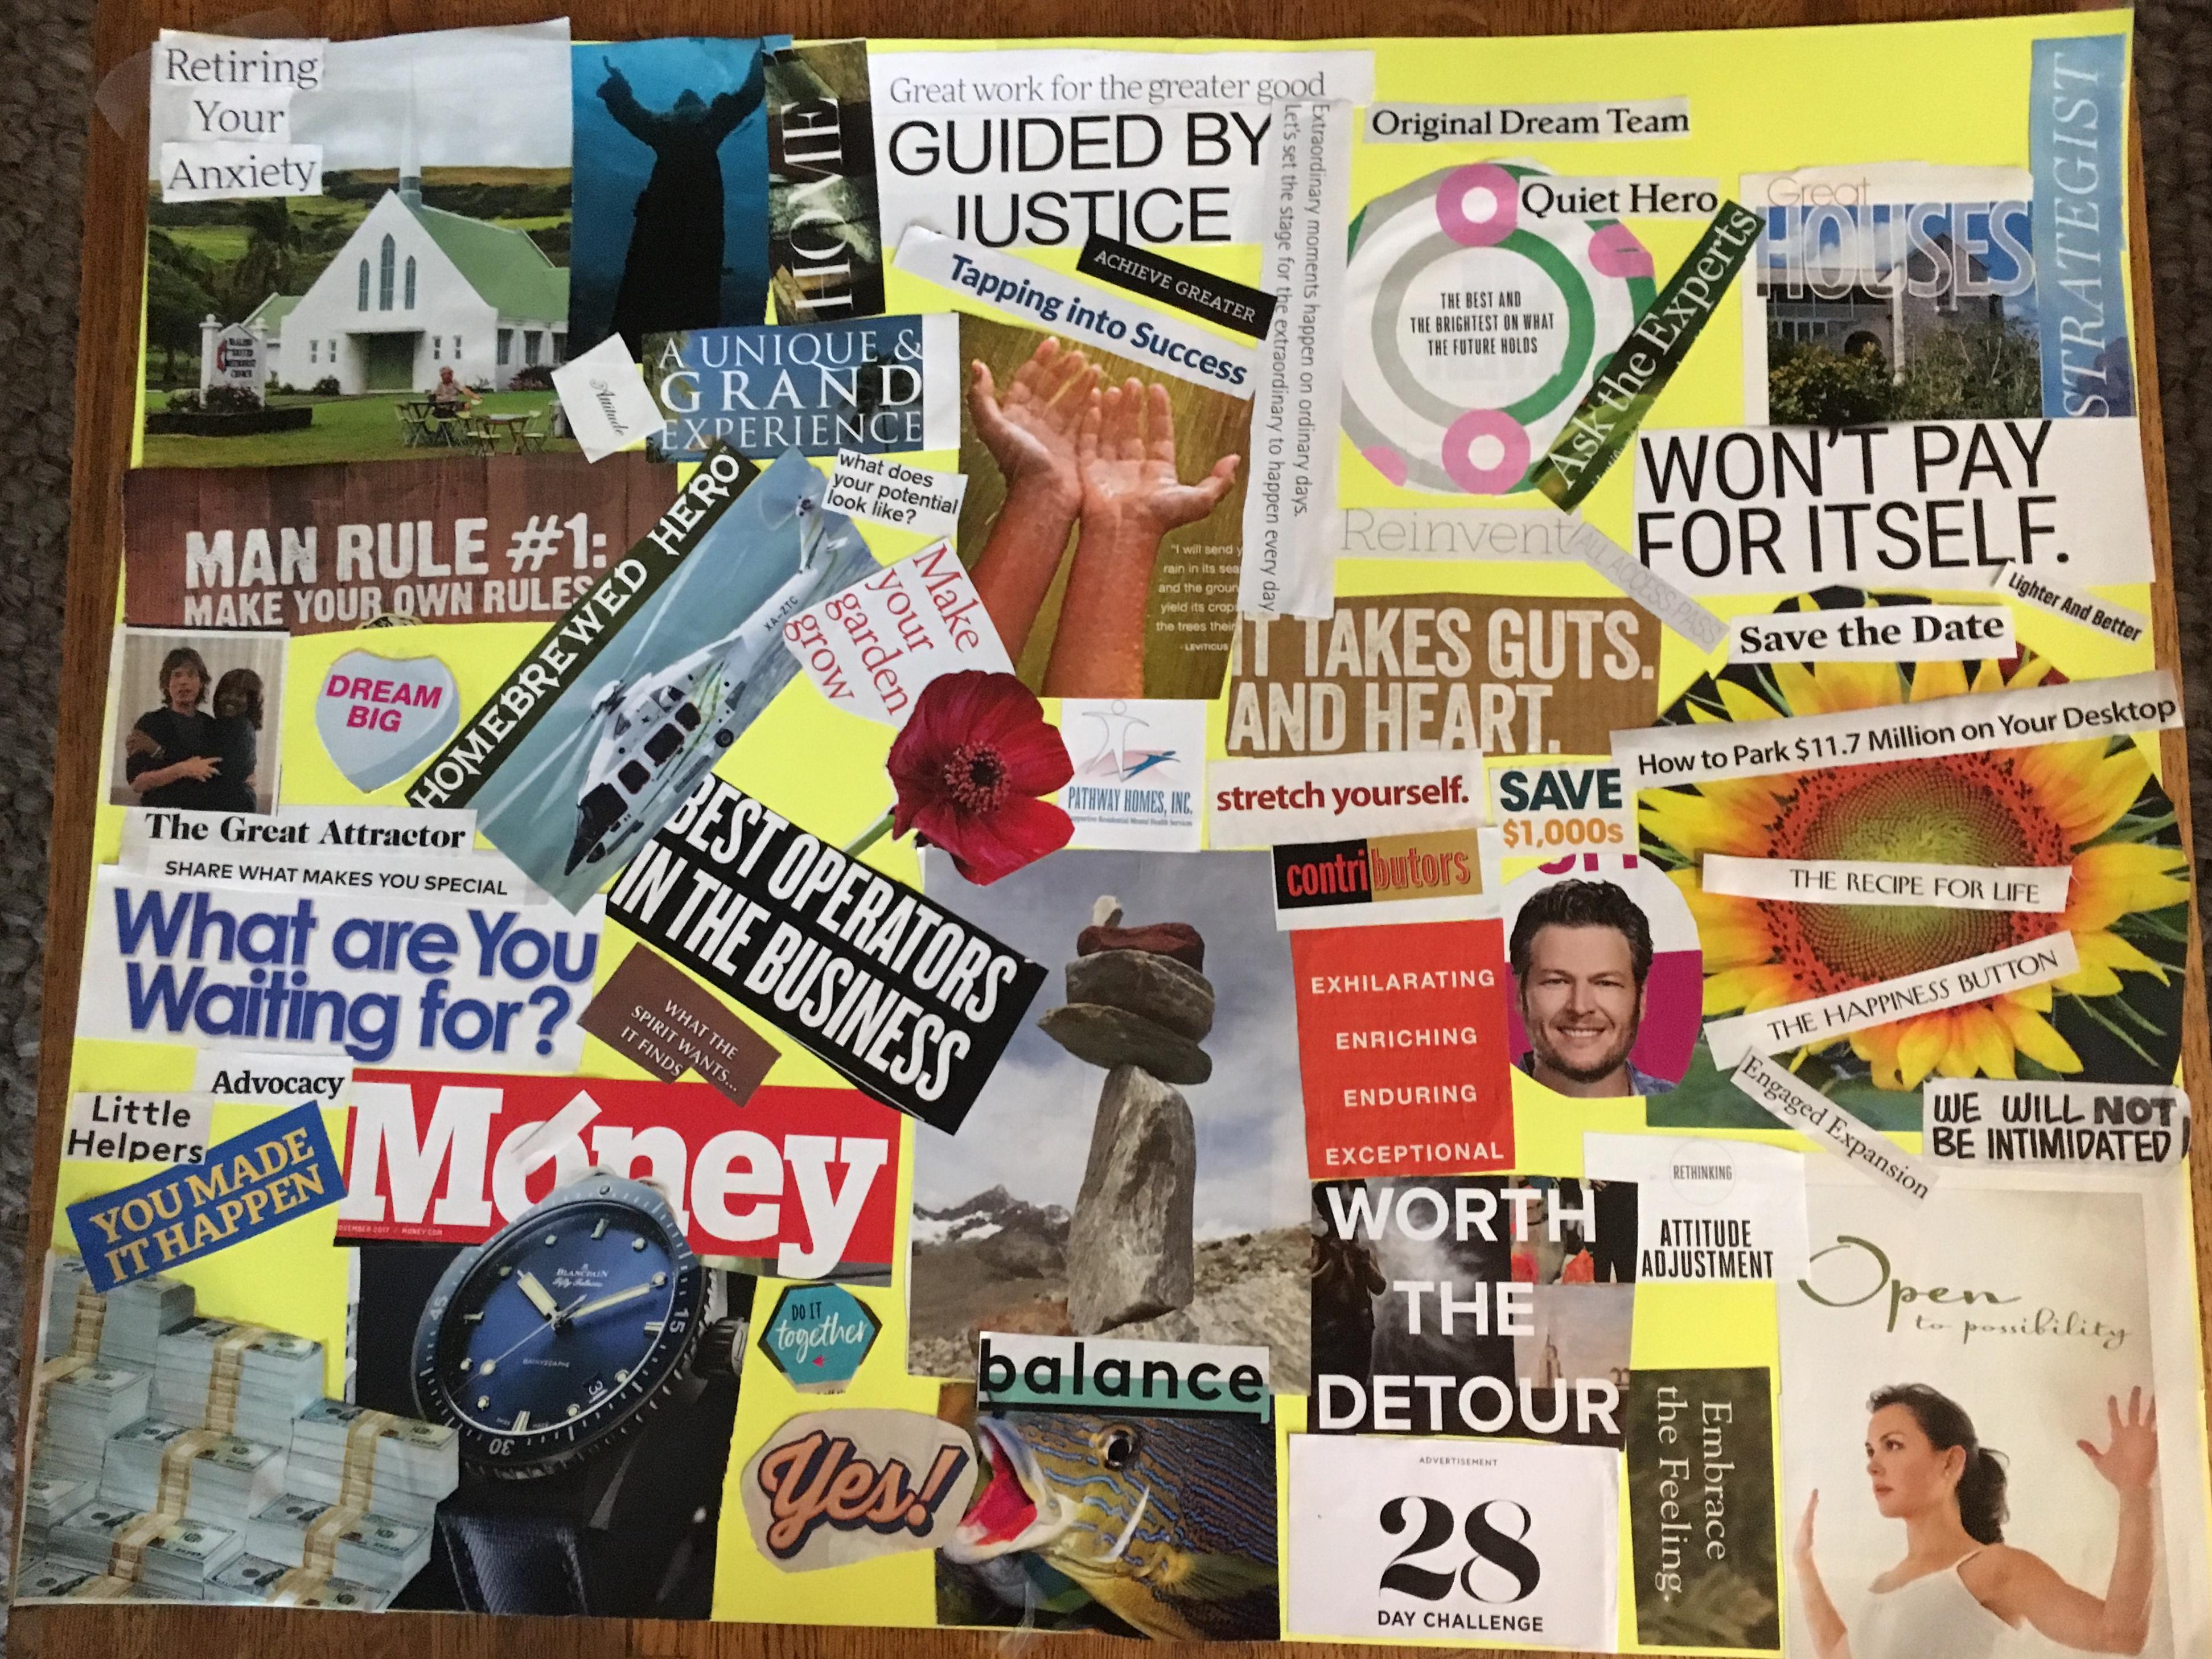 Create Your Life Vision Board Workshop